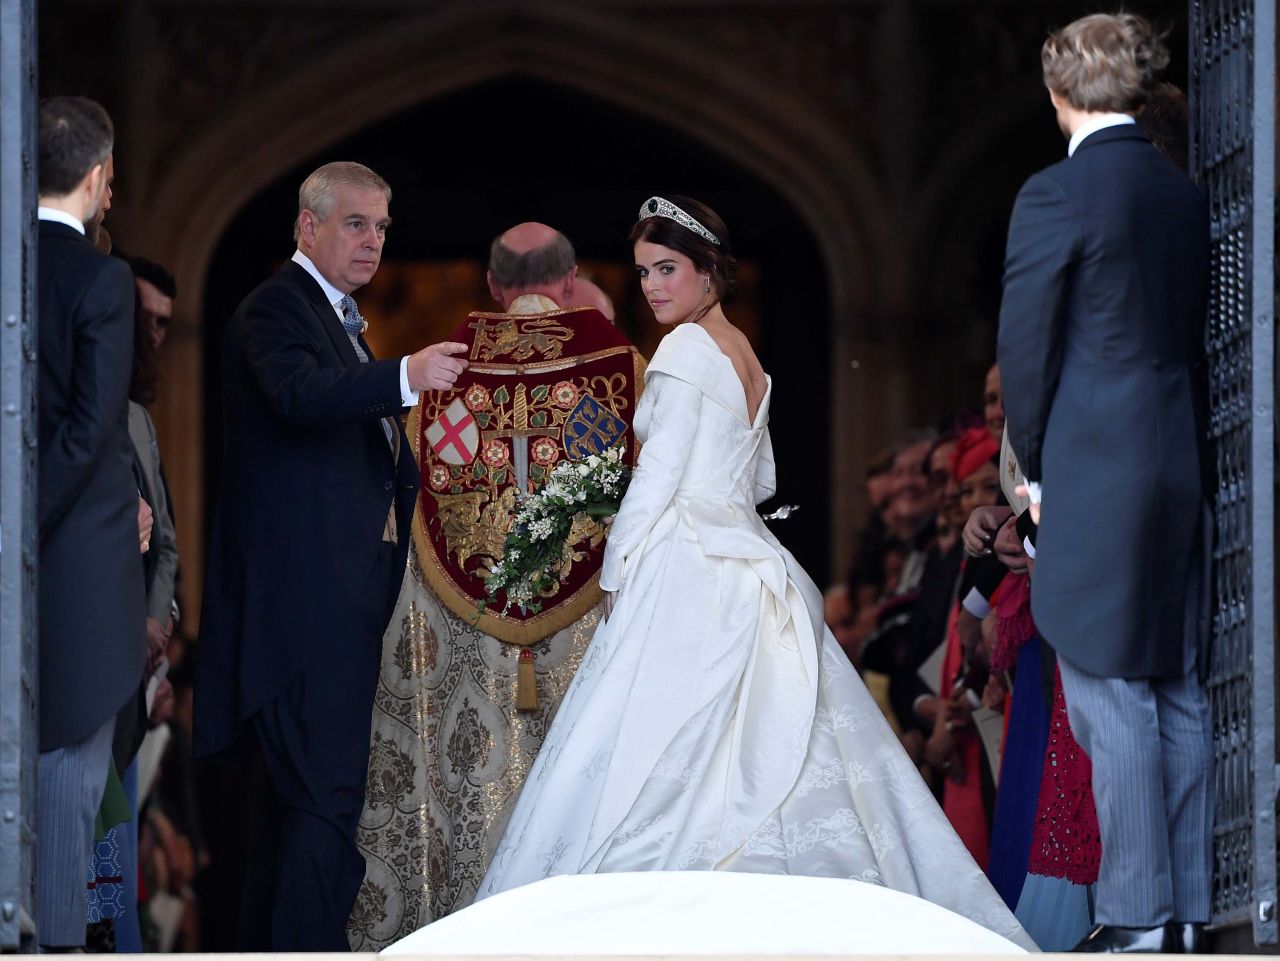 Princess Eugenie enters St George's Chapel with her father Prince Andrew, Duke of York, for her wedding to Jack Brooksbank.